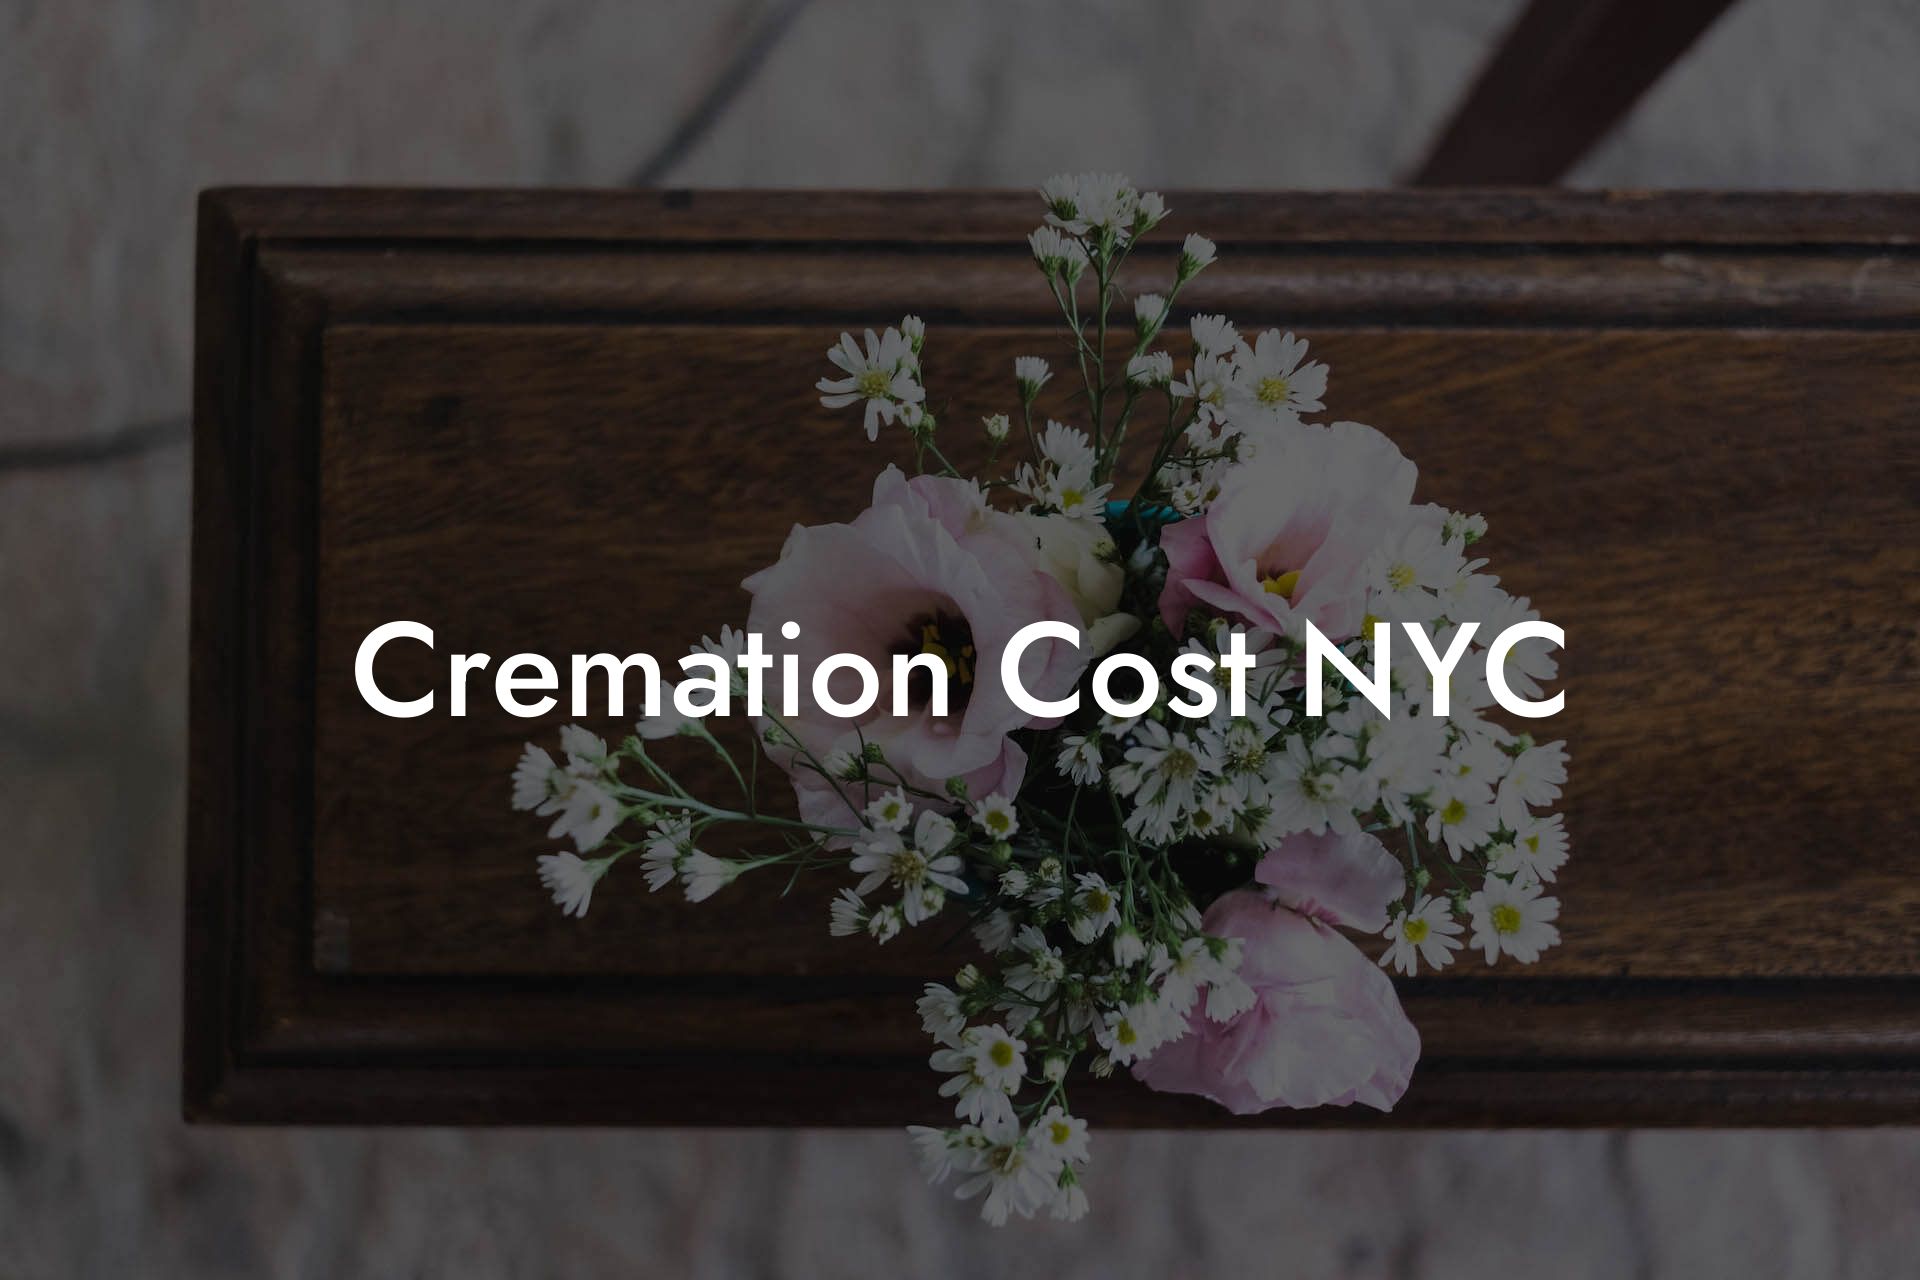 Cremation Cost NYC